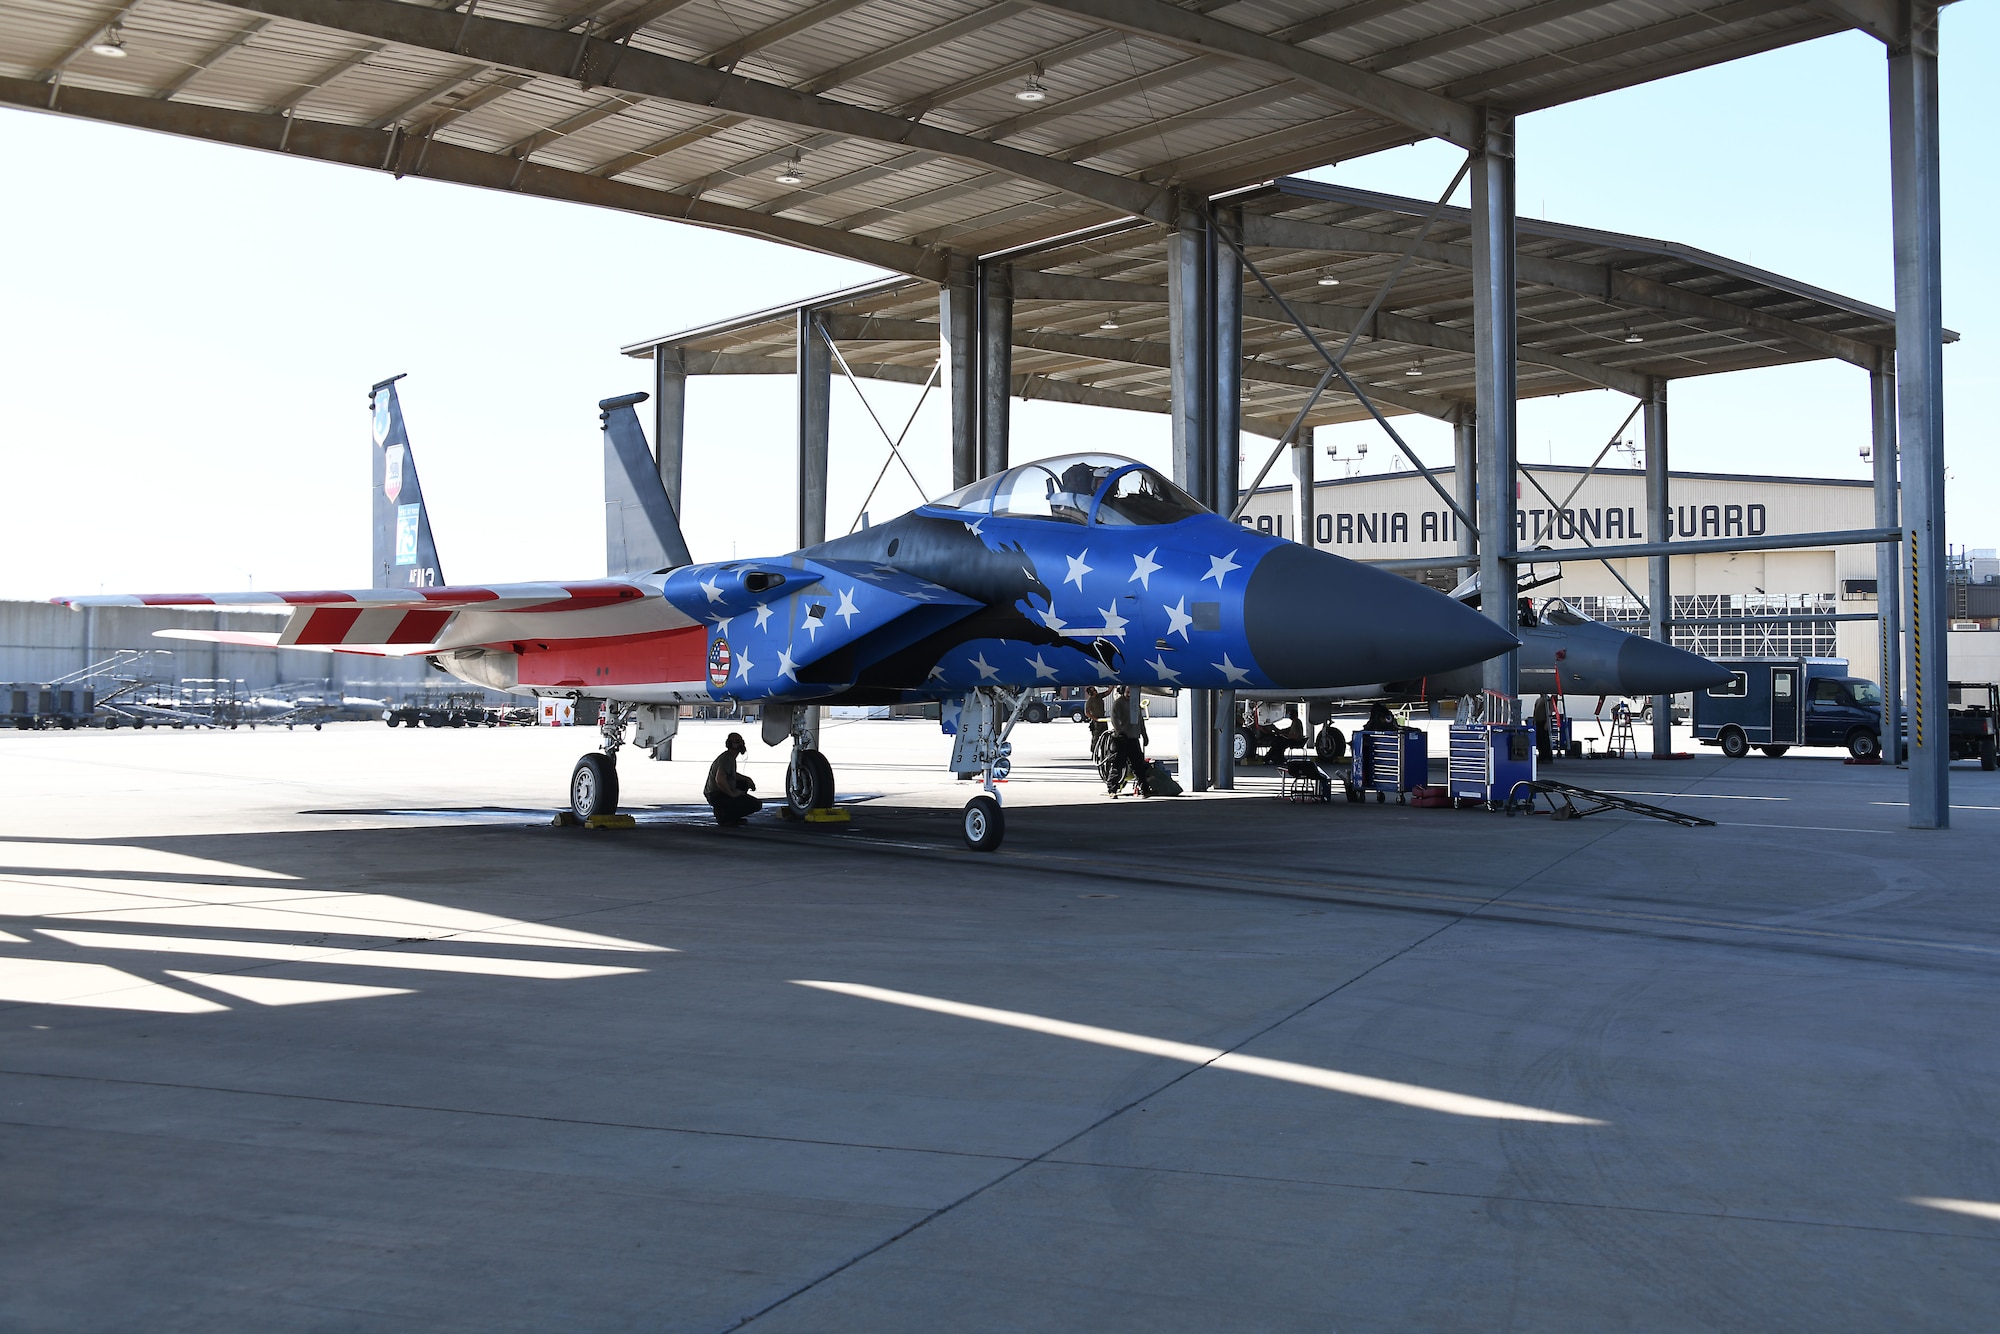 An F-15C fighter jet with a red, white, and blue paint scheme is parked under an aircraft bay.